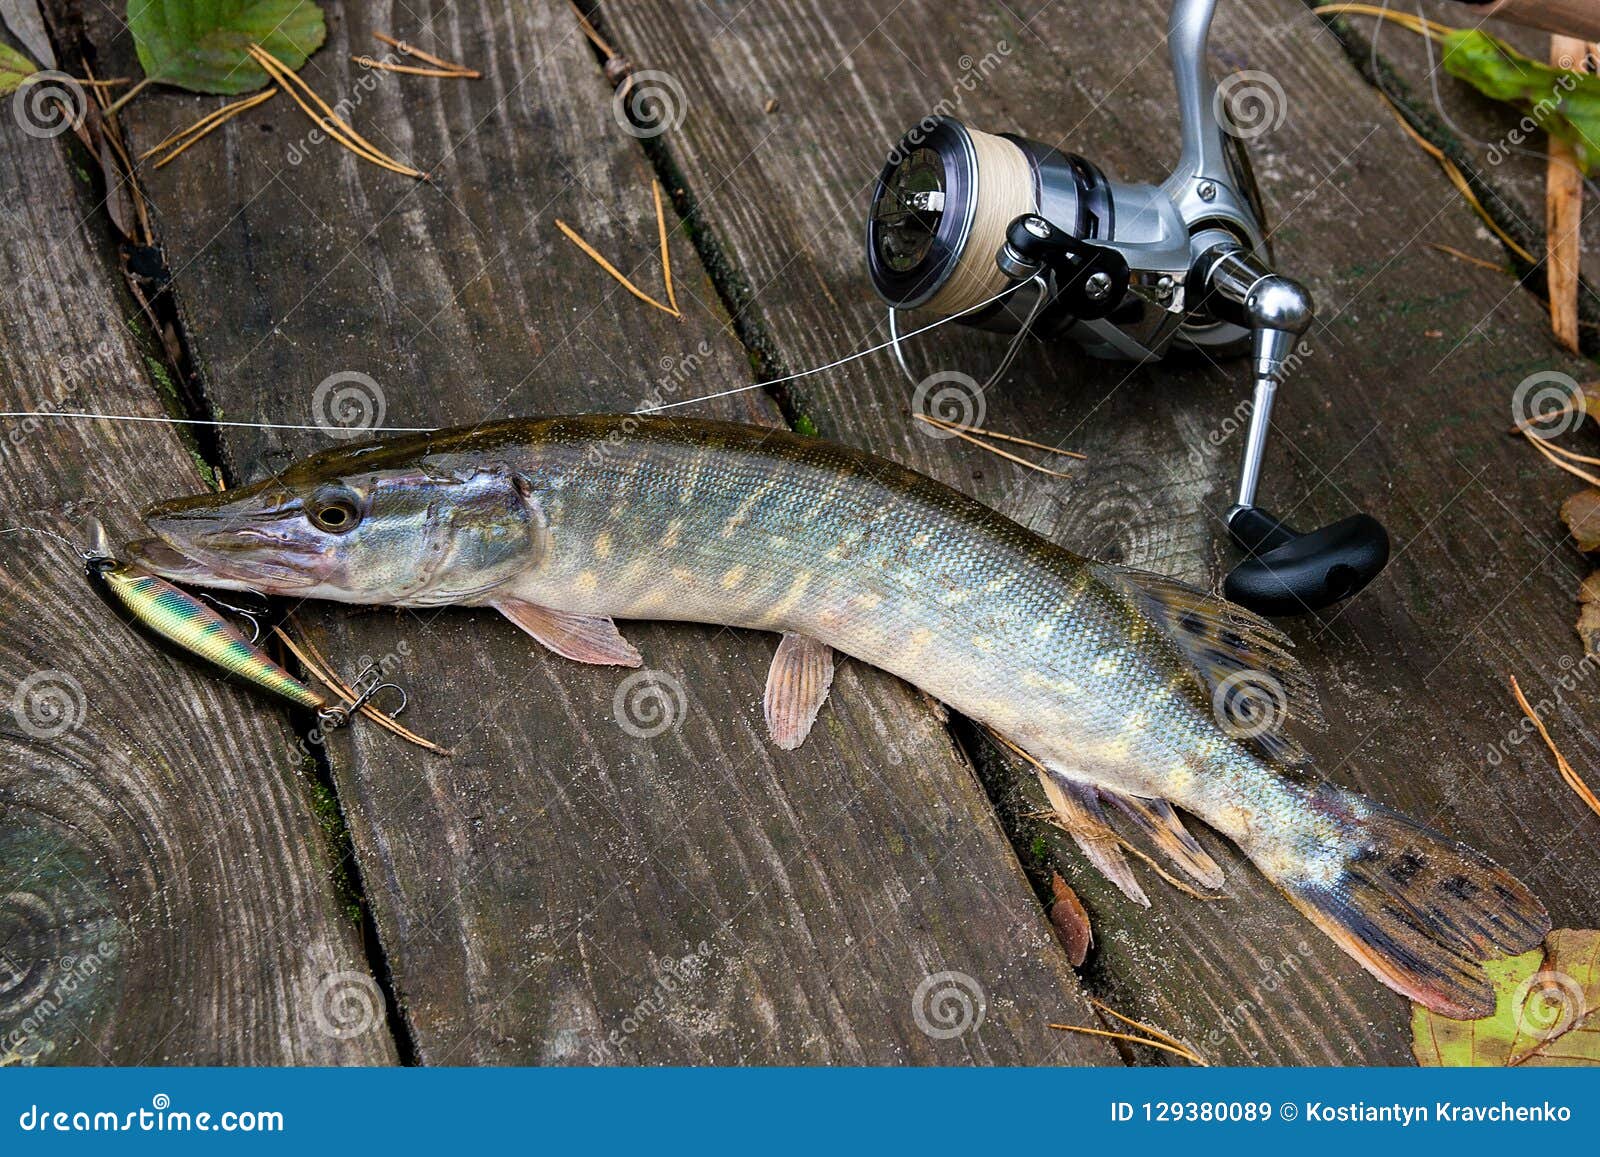 Freshwater Pike with Fishing Bait in Mouth and Fishing Equipment Stock  Image - Image of fish, activity: 129380089